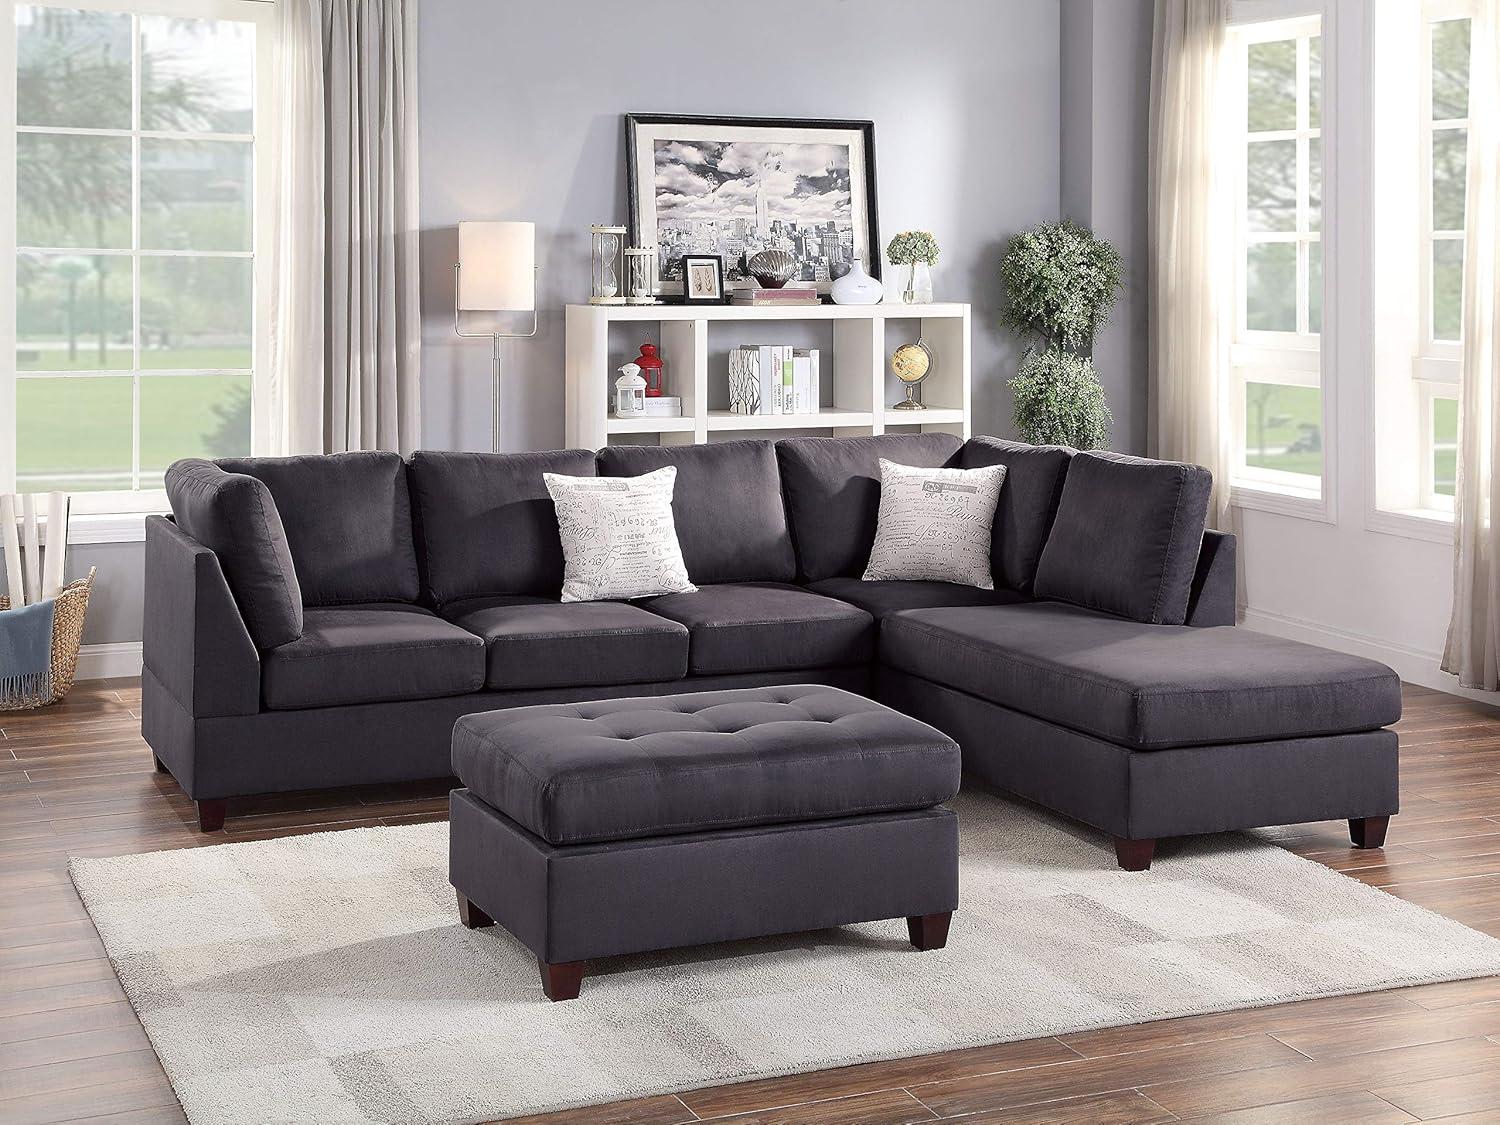 Ebony Faux Leather 3-Piece Sectional with Ottoman and Pillow Back